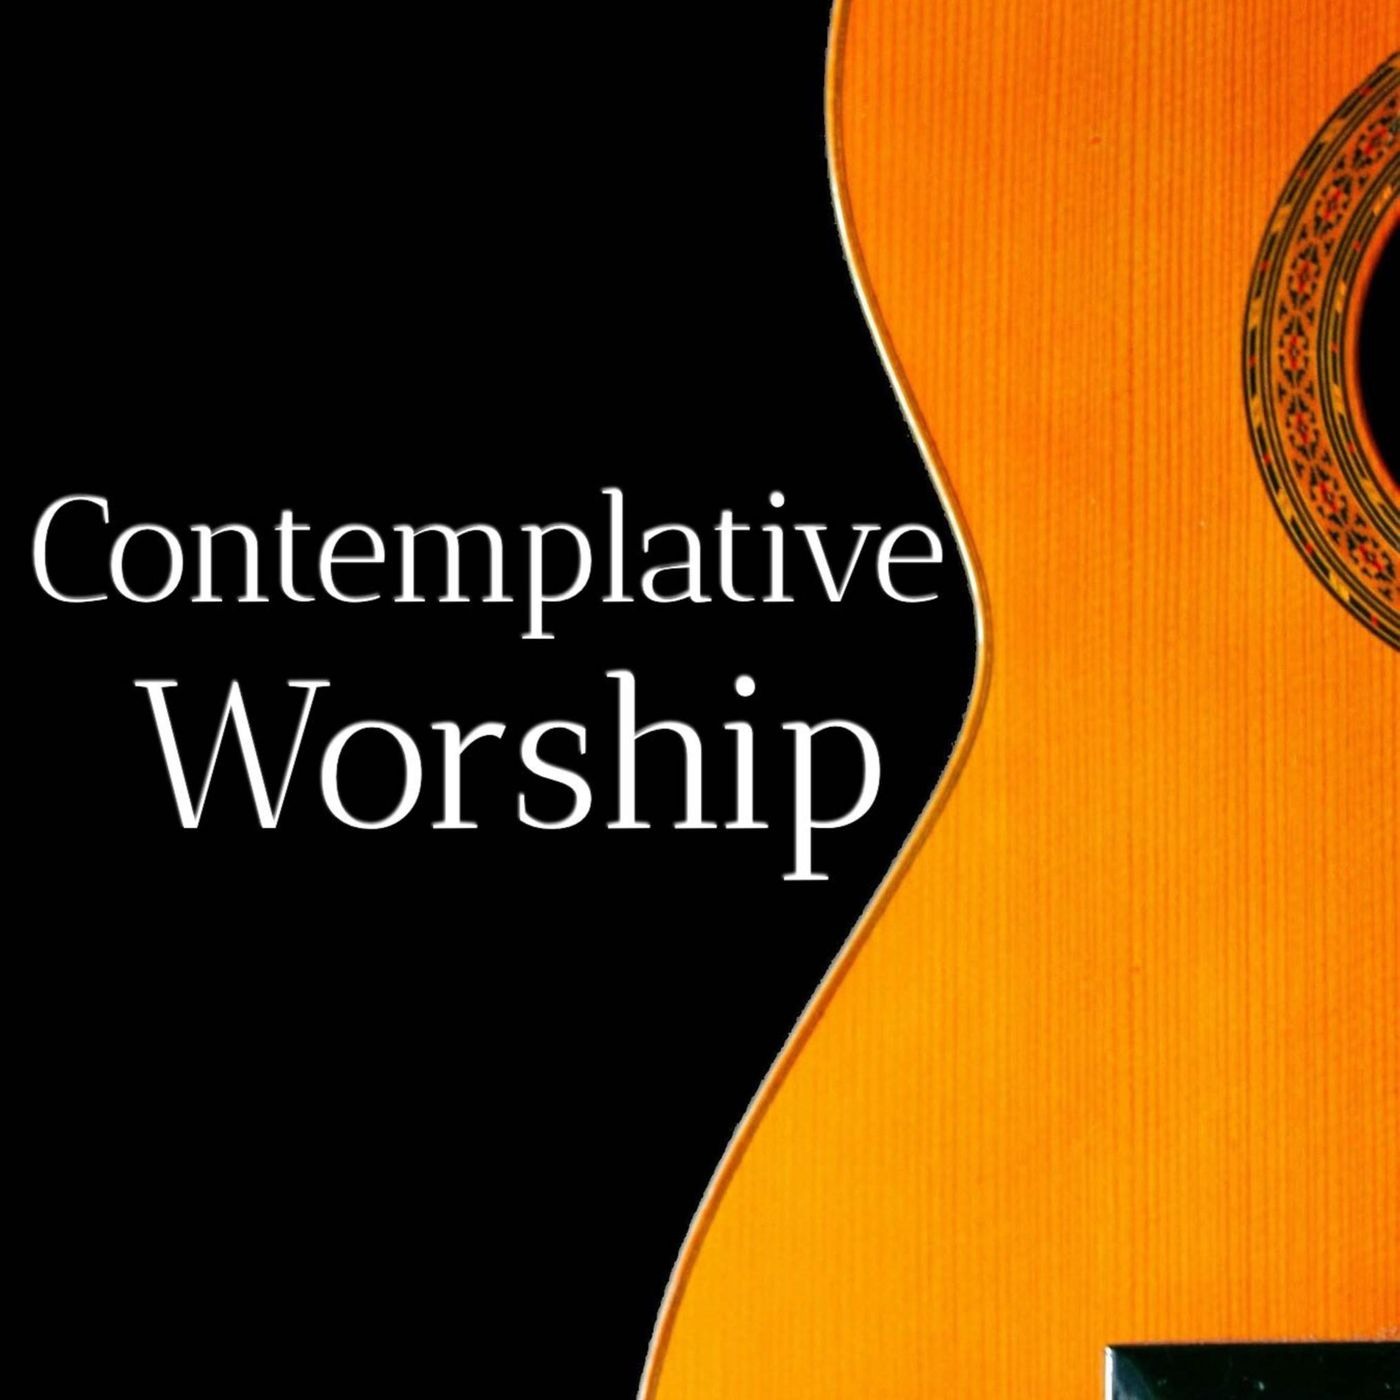 Recording of Contemplative Worship Online-February 17, 2022